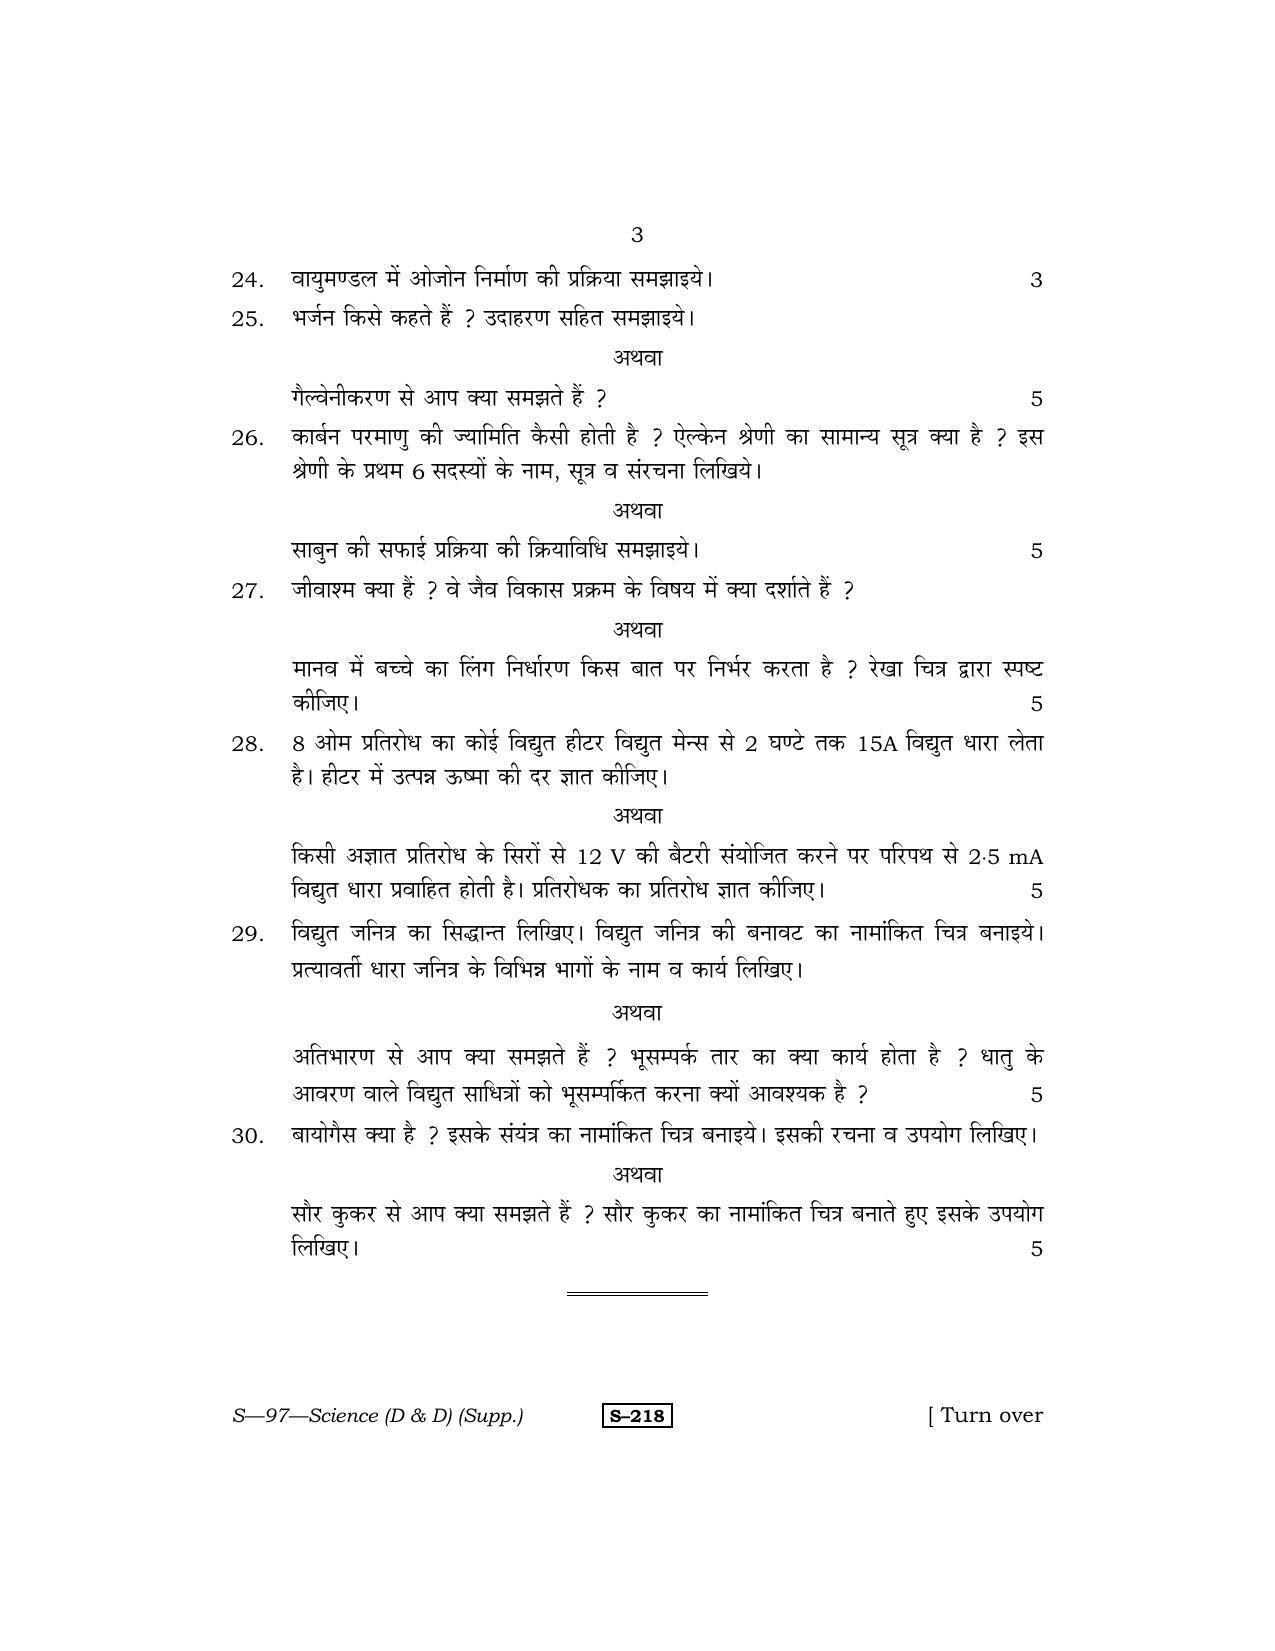 RBSE Class 10 Science (D & D) (Supp.) 2013 Question Paper - Page 3